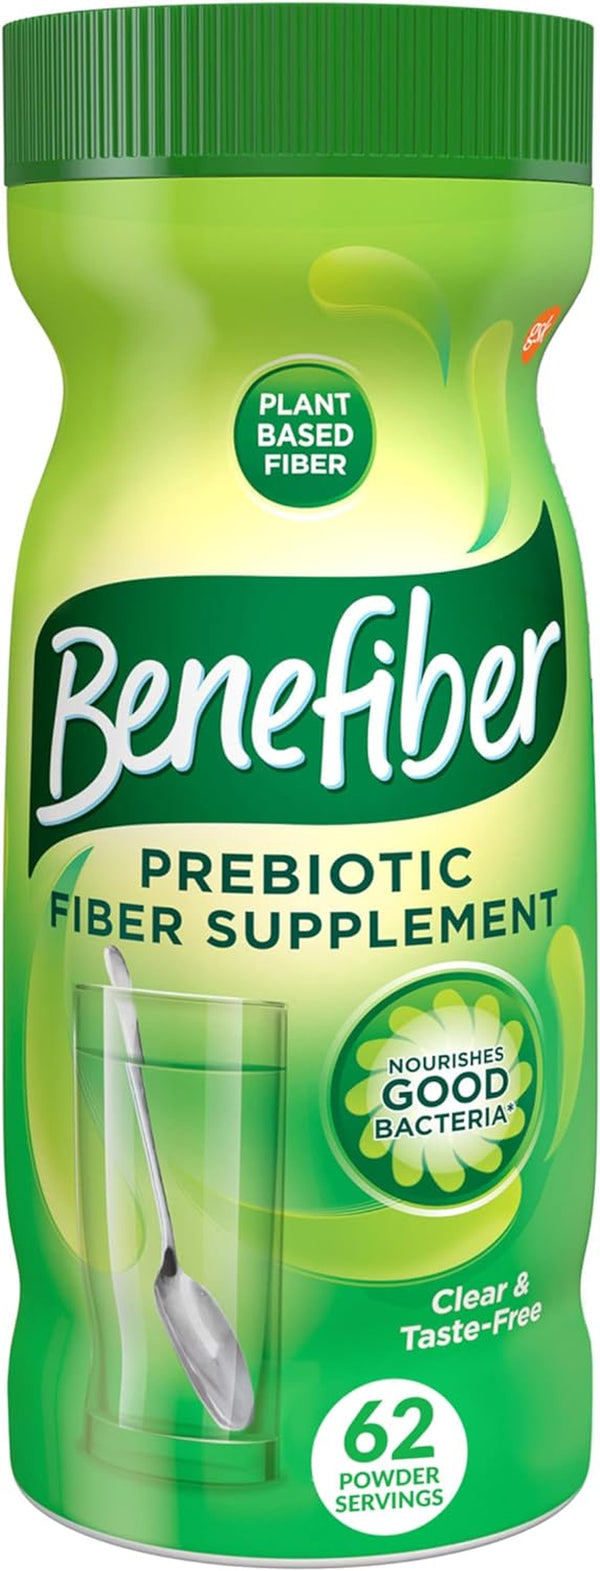 Benefiber Daily Prebiotic Fiber Supplement Powder for Digestive Health, Daily Fiber Powder, Unflavored - 62 Servings (8.7 Ounces)